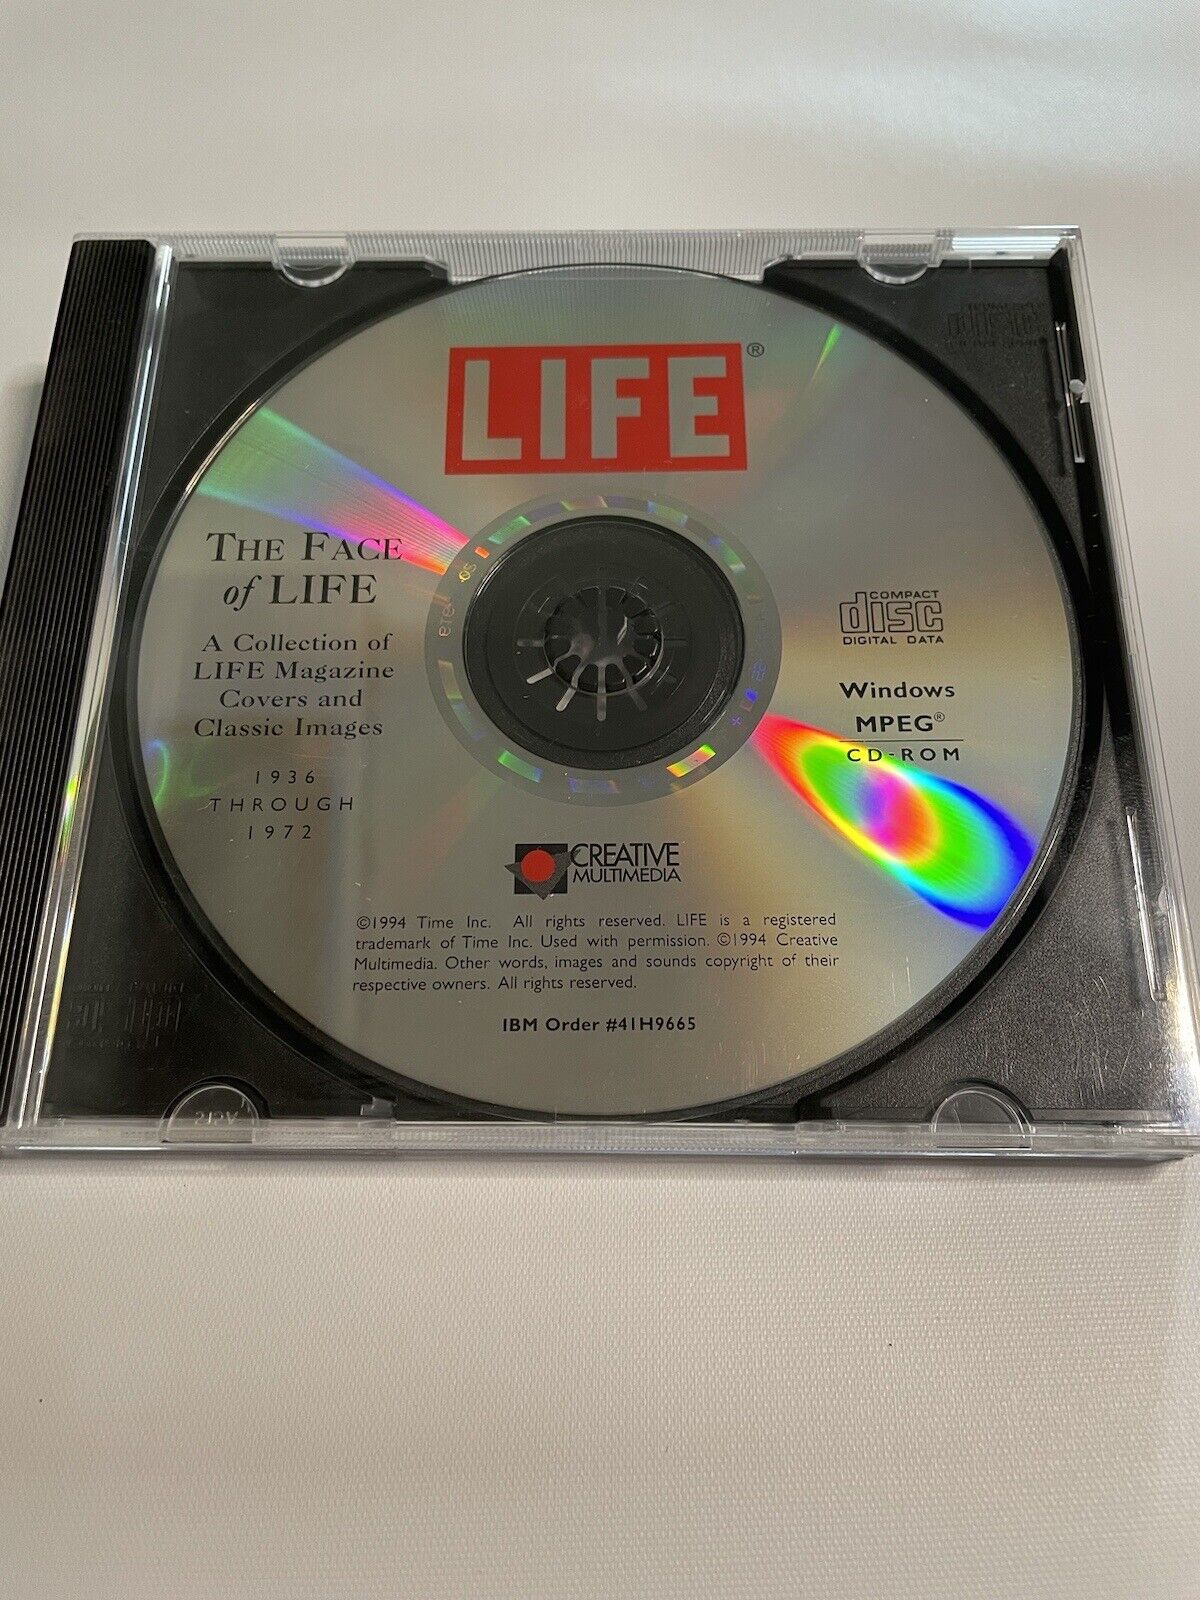 The Face of Life CD-ROM LIFE Mag. Covers/Classic Images 1936-1972 DISC ONLY